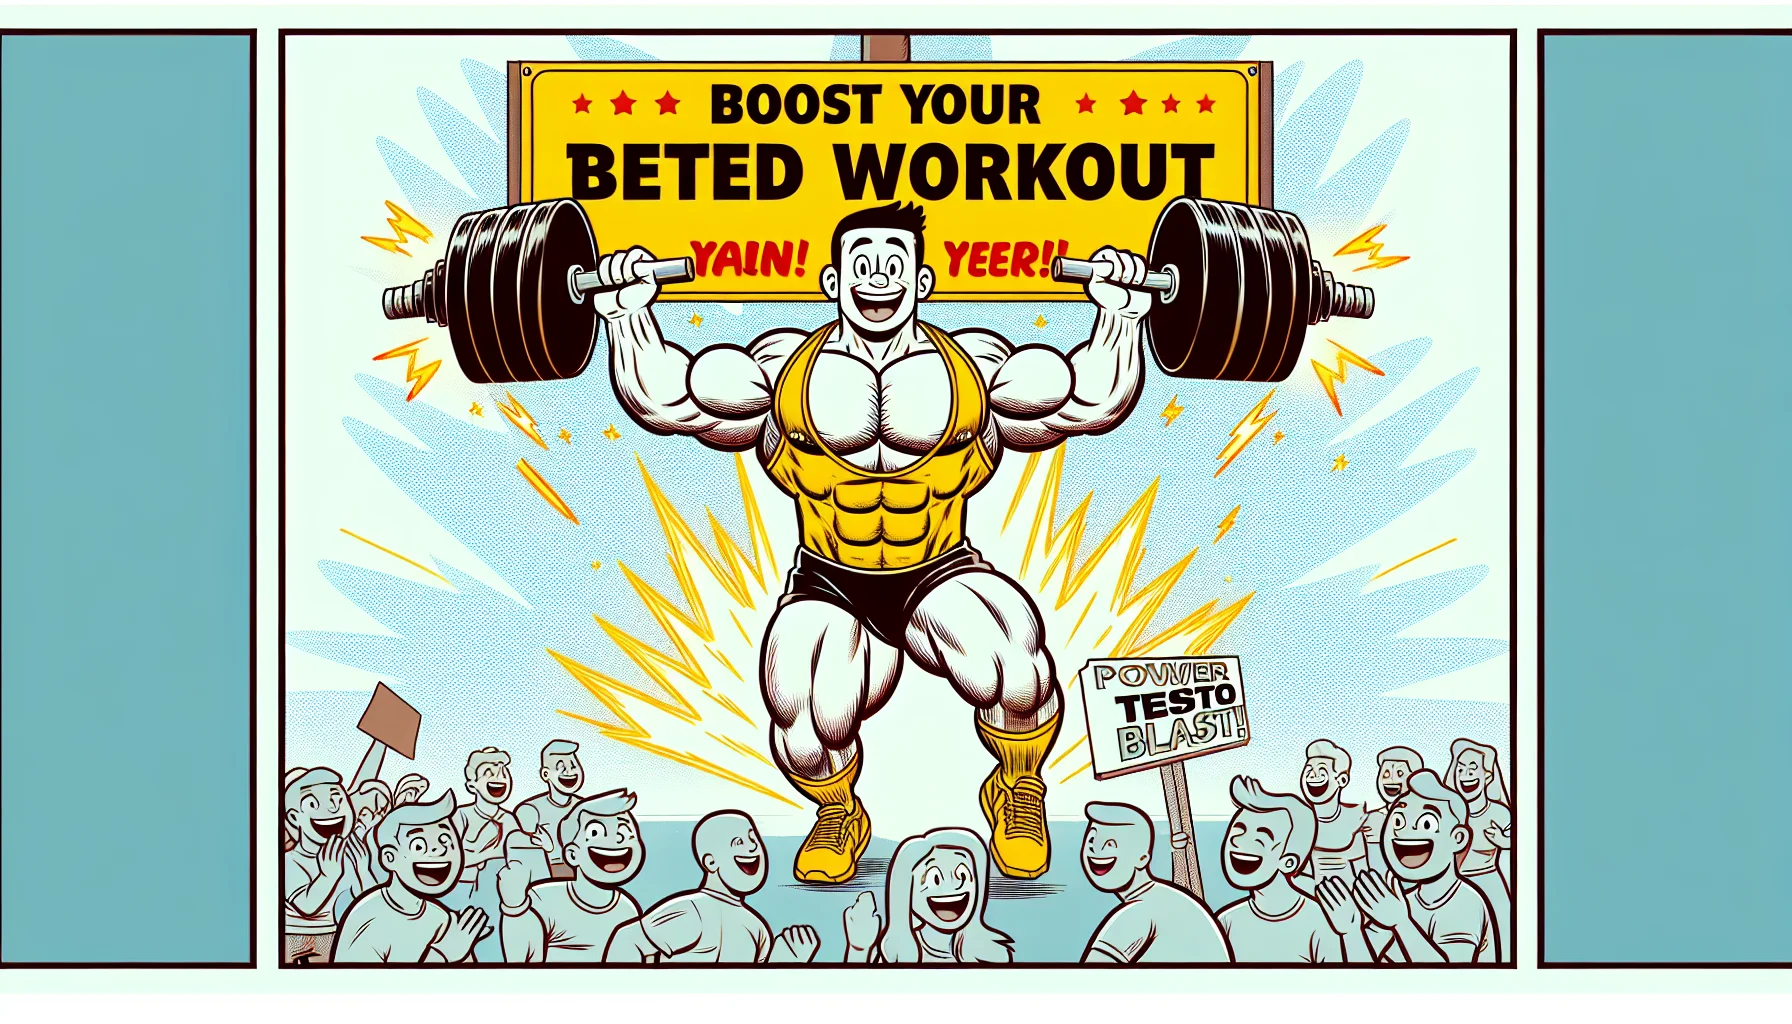 Imagine a comical yet motivating scenario that encourages fitness activities. Picture an exaggeratedly muscular cartoon character happily lifting heavy weights, with the words 'Boost Your Workout' arched overhead in bold letters. Underneath the exercising character, display the phrase 'Power Testo Blast' glowing impressively. To complete the scene, illustrate a crowd of varying gender and descent, all laughing and cheering enthusiastically, motivated by the sight.